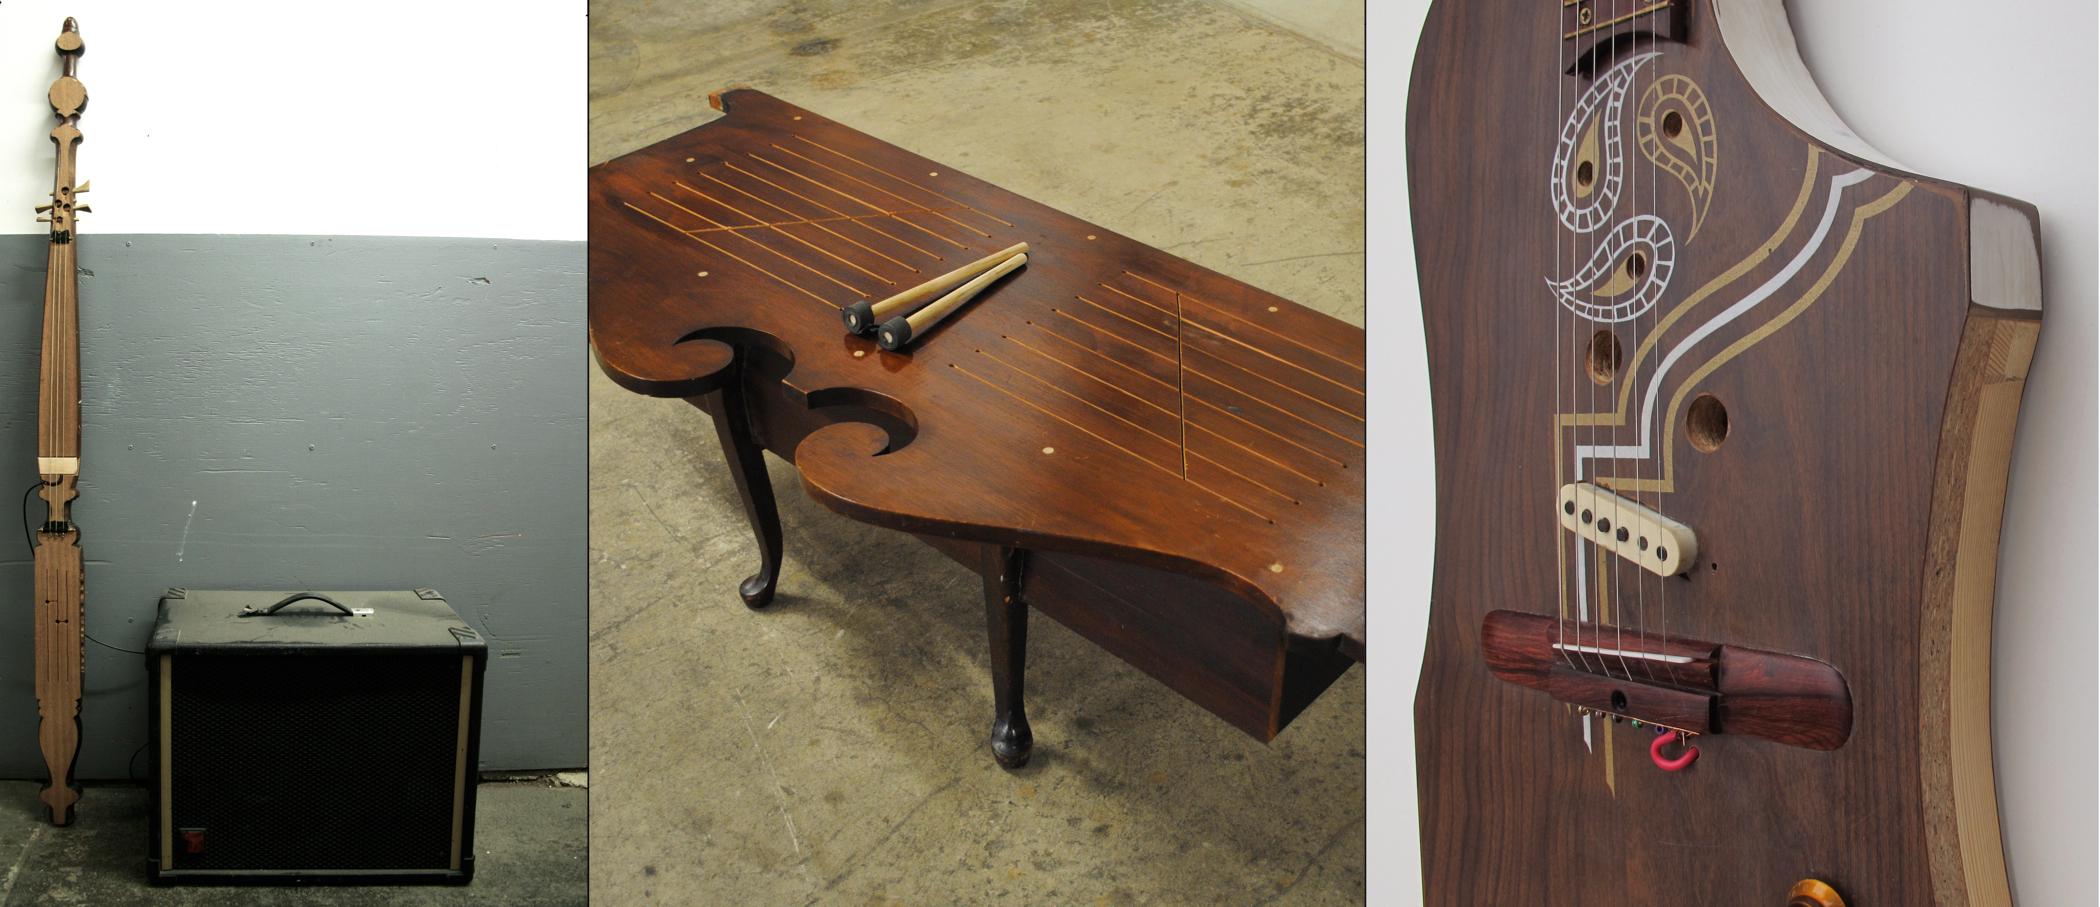 A triptych of photographs shows three musical instruments that have been changed into sculptural objects or furniture.